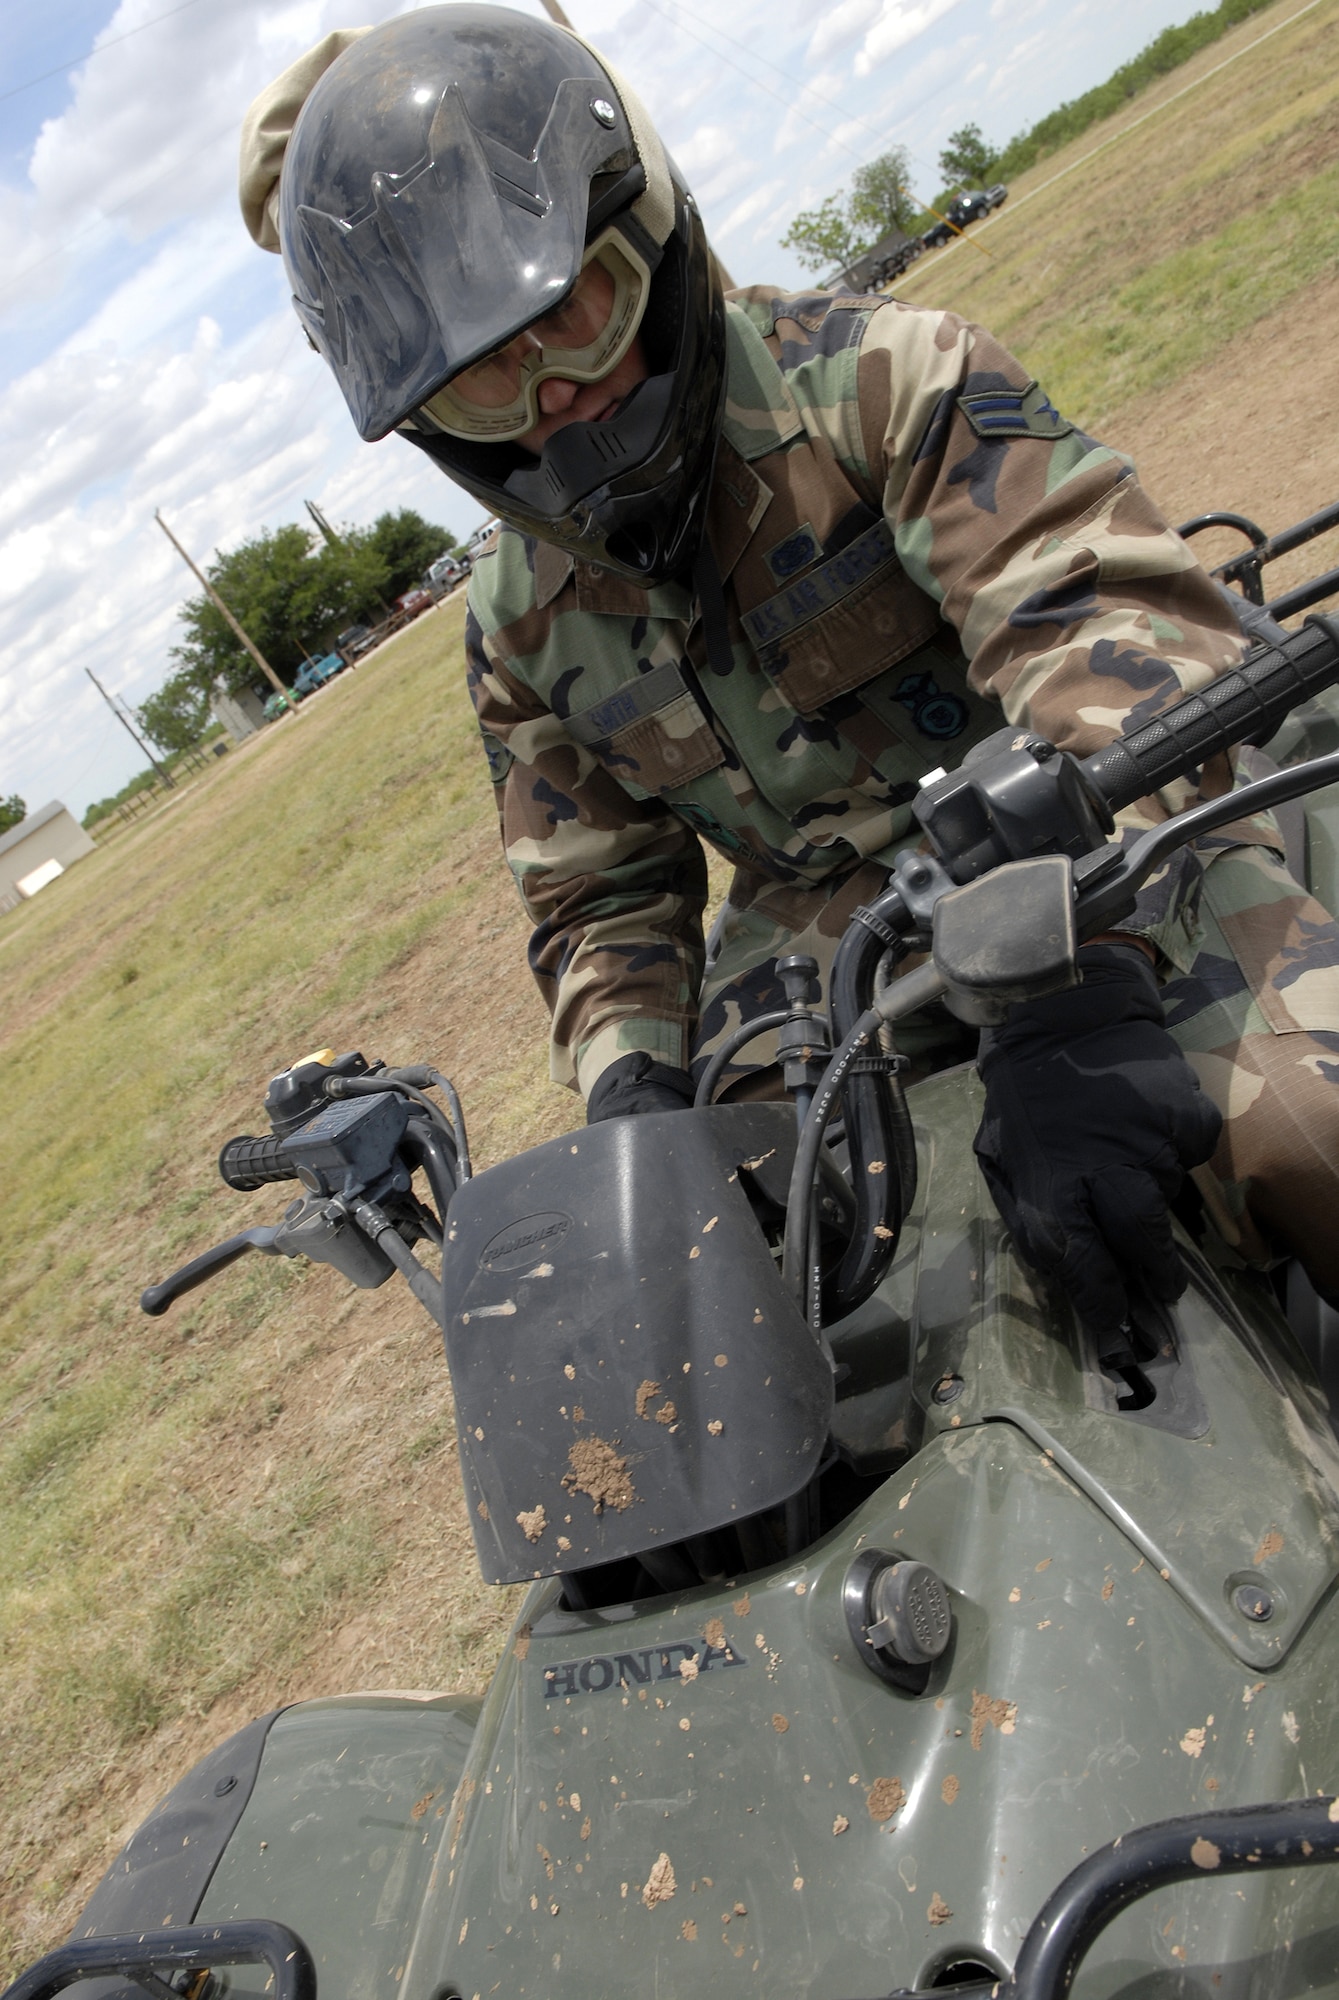 Airman 1st Class Jeremy Smith, 17th Security Forces Squadron, does a quick safety inspection on his ATV during the ATV Rider Course. Airman Smith was one of seven Airmen to participate in the first ATV Rider Course at Goodfellow. (U.S. Air Force photo by Senior Airman Kamaile Chan)